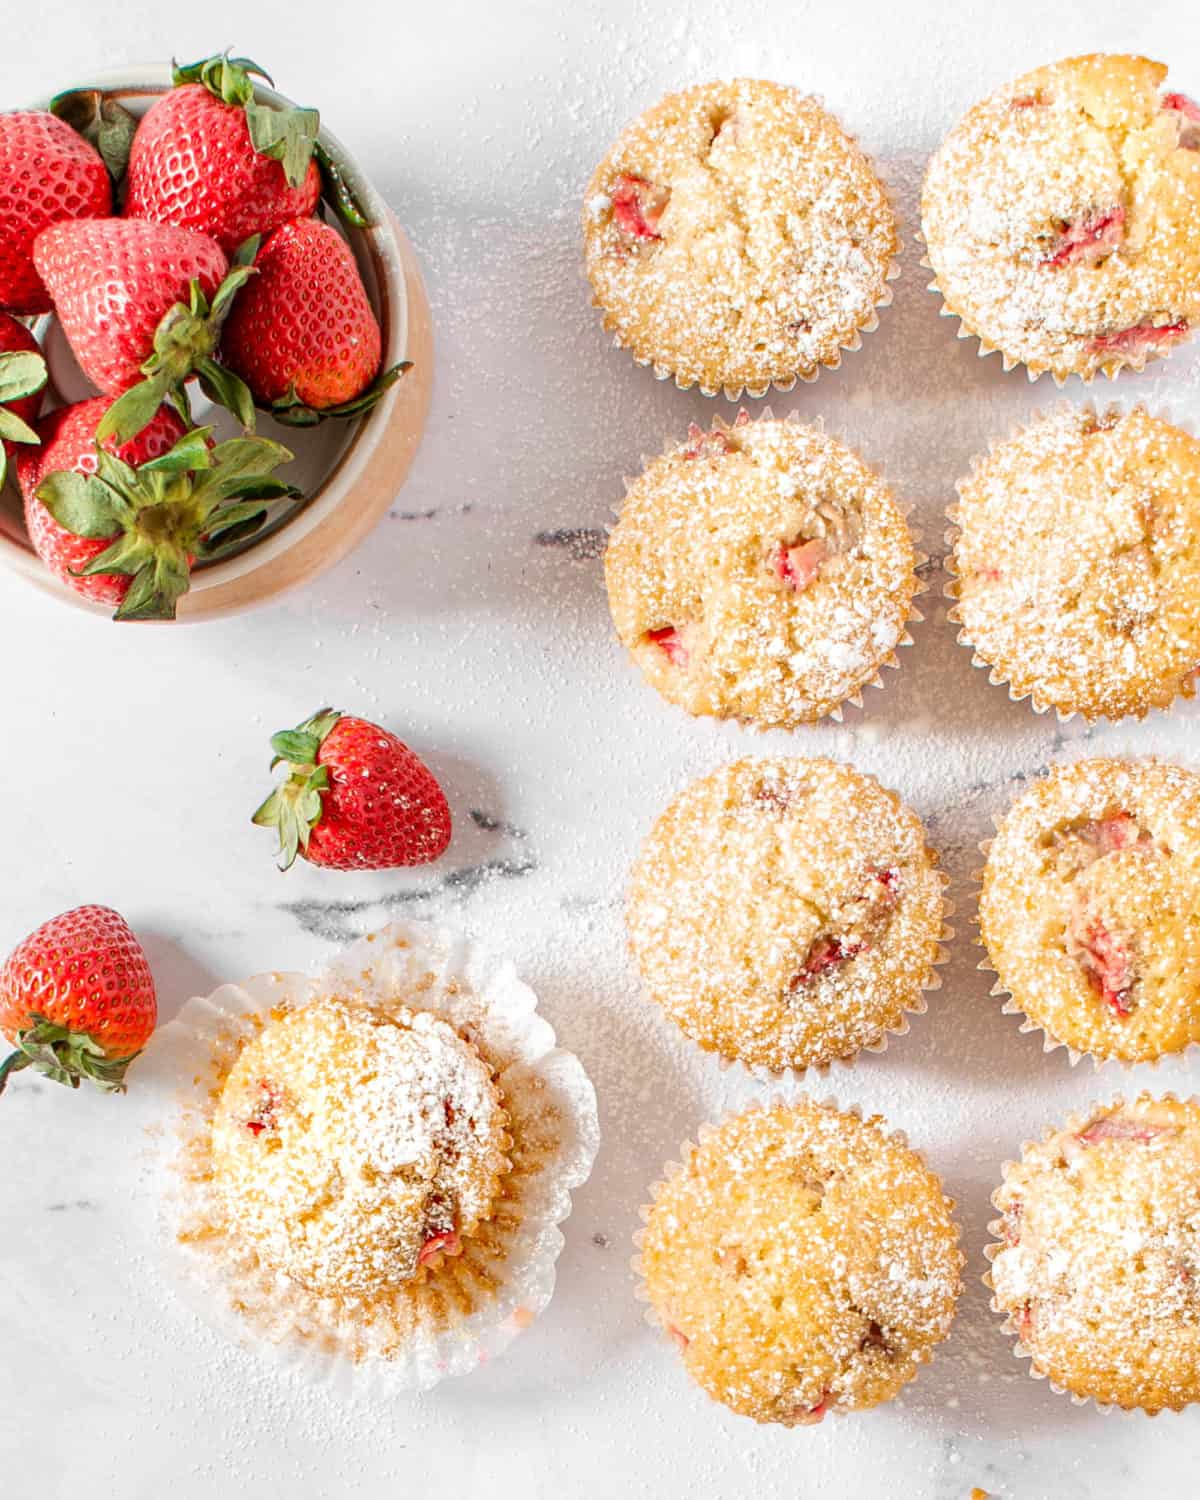 Several strawberry lemon muffins spread out on a table.